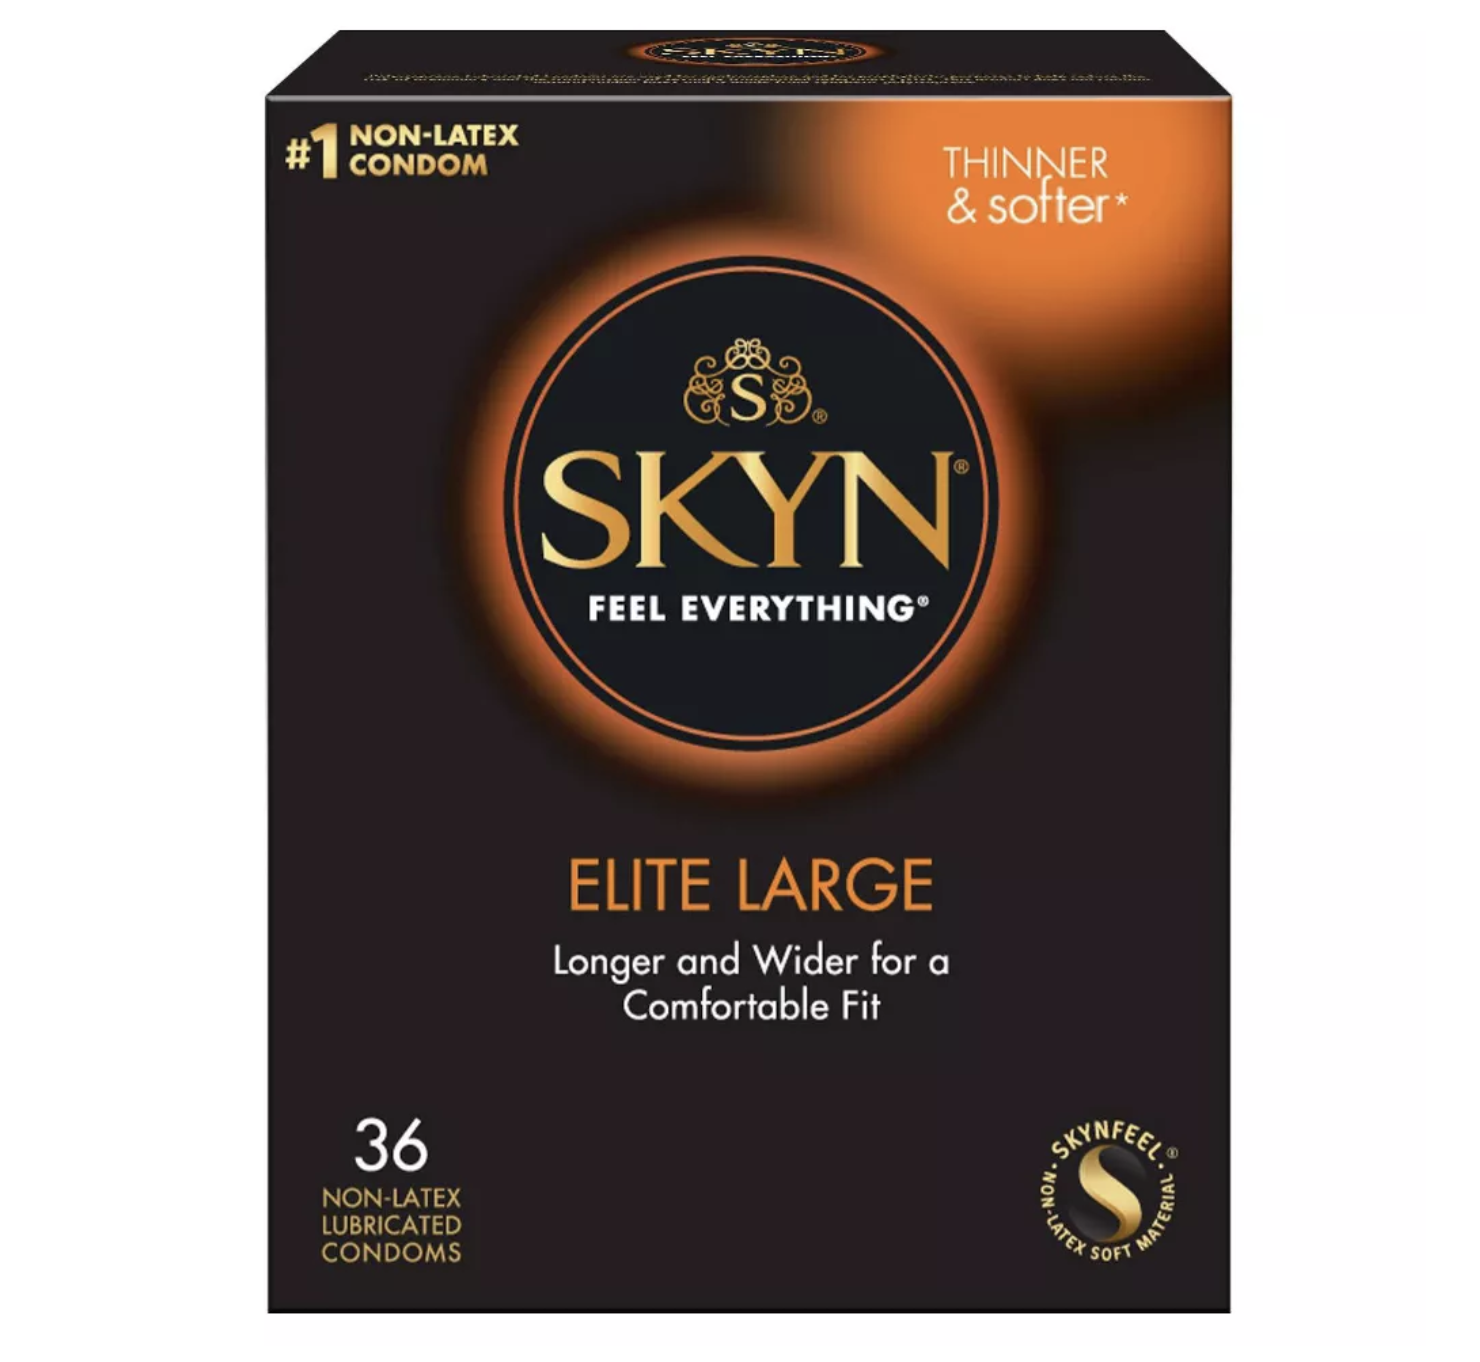 Product image of box of Skyn elite large condoms